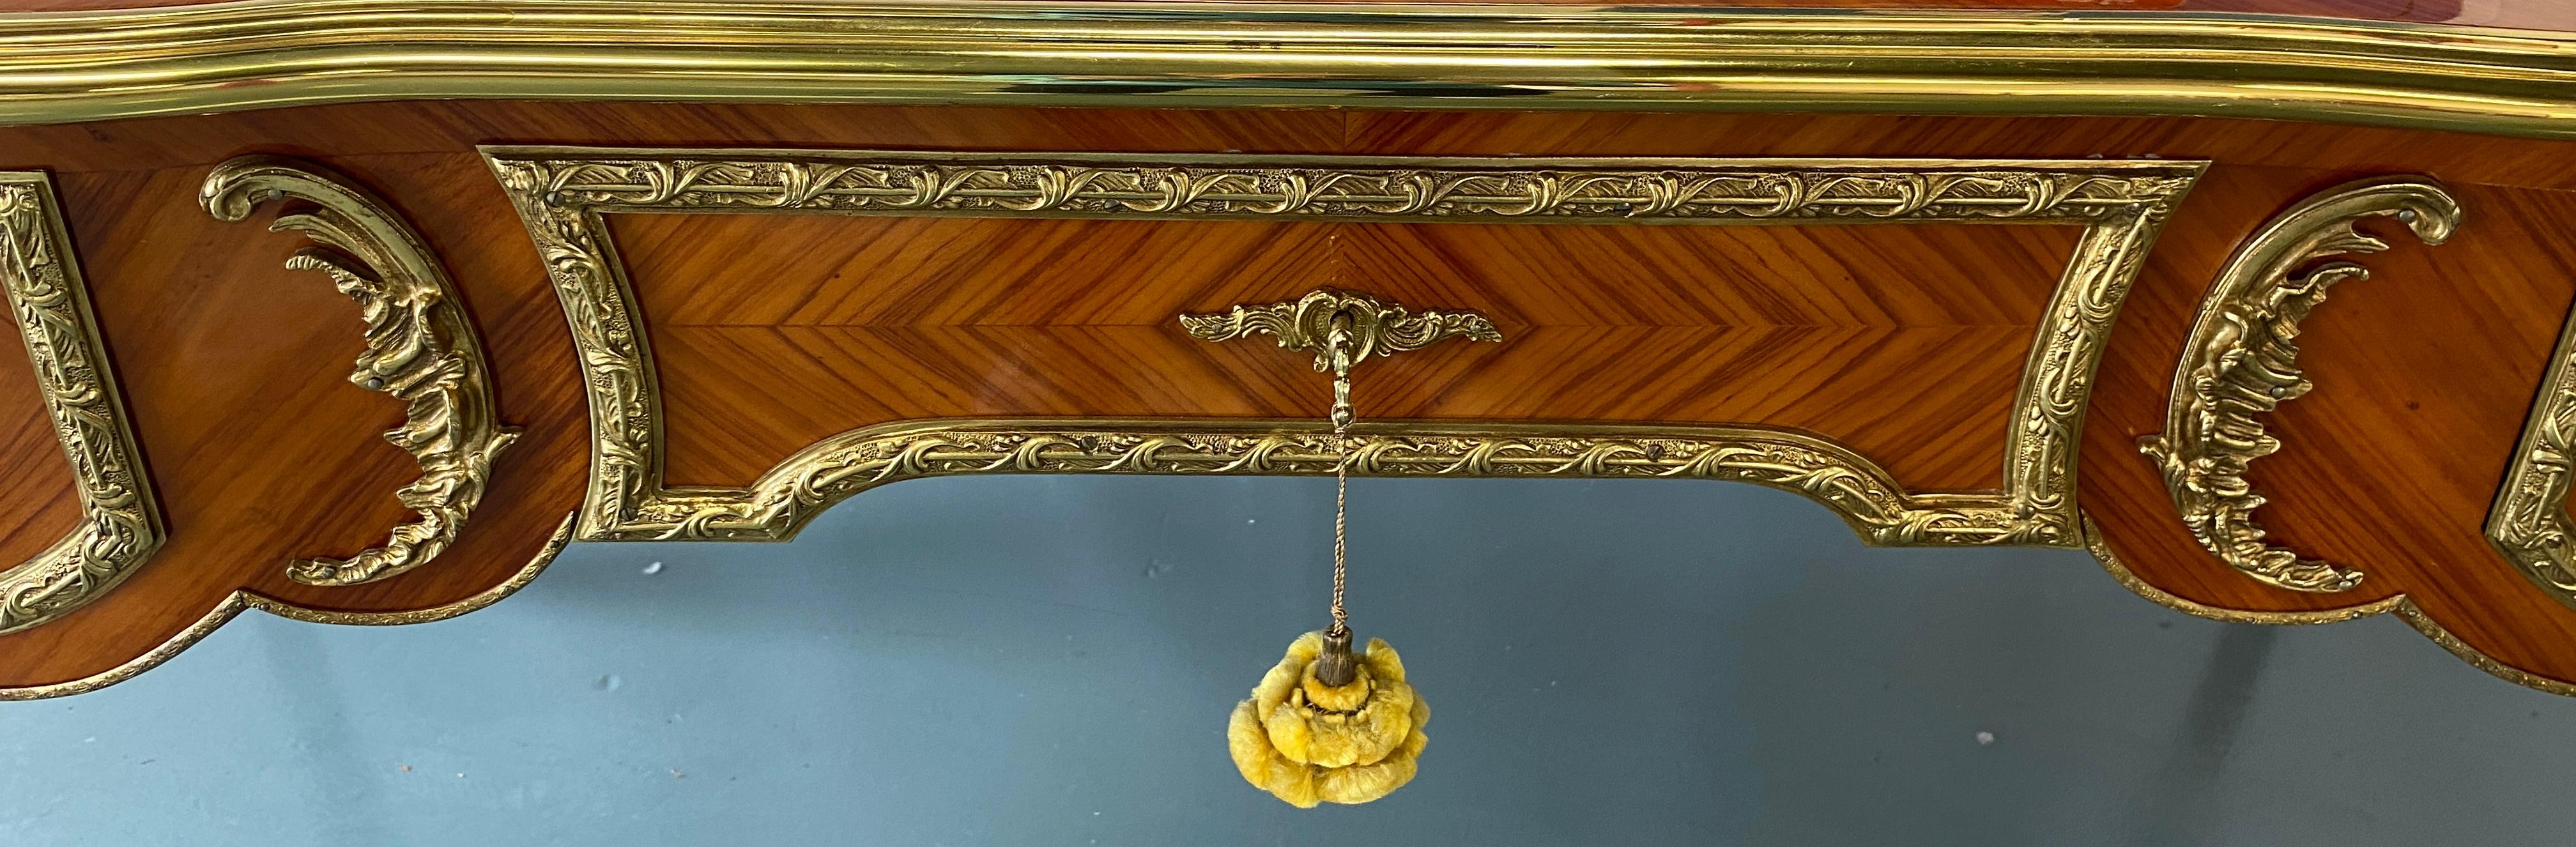 French Louis XV Style Bureau Plat with Ormolu Mounts French Flat Desk For Sale 3